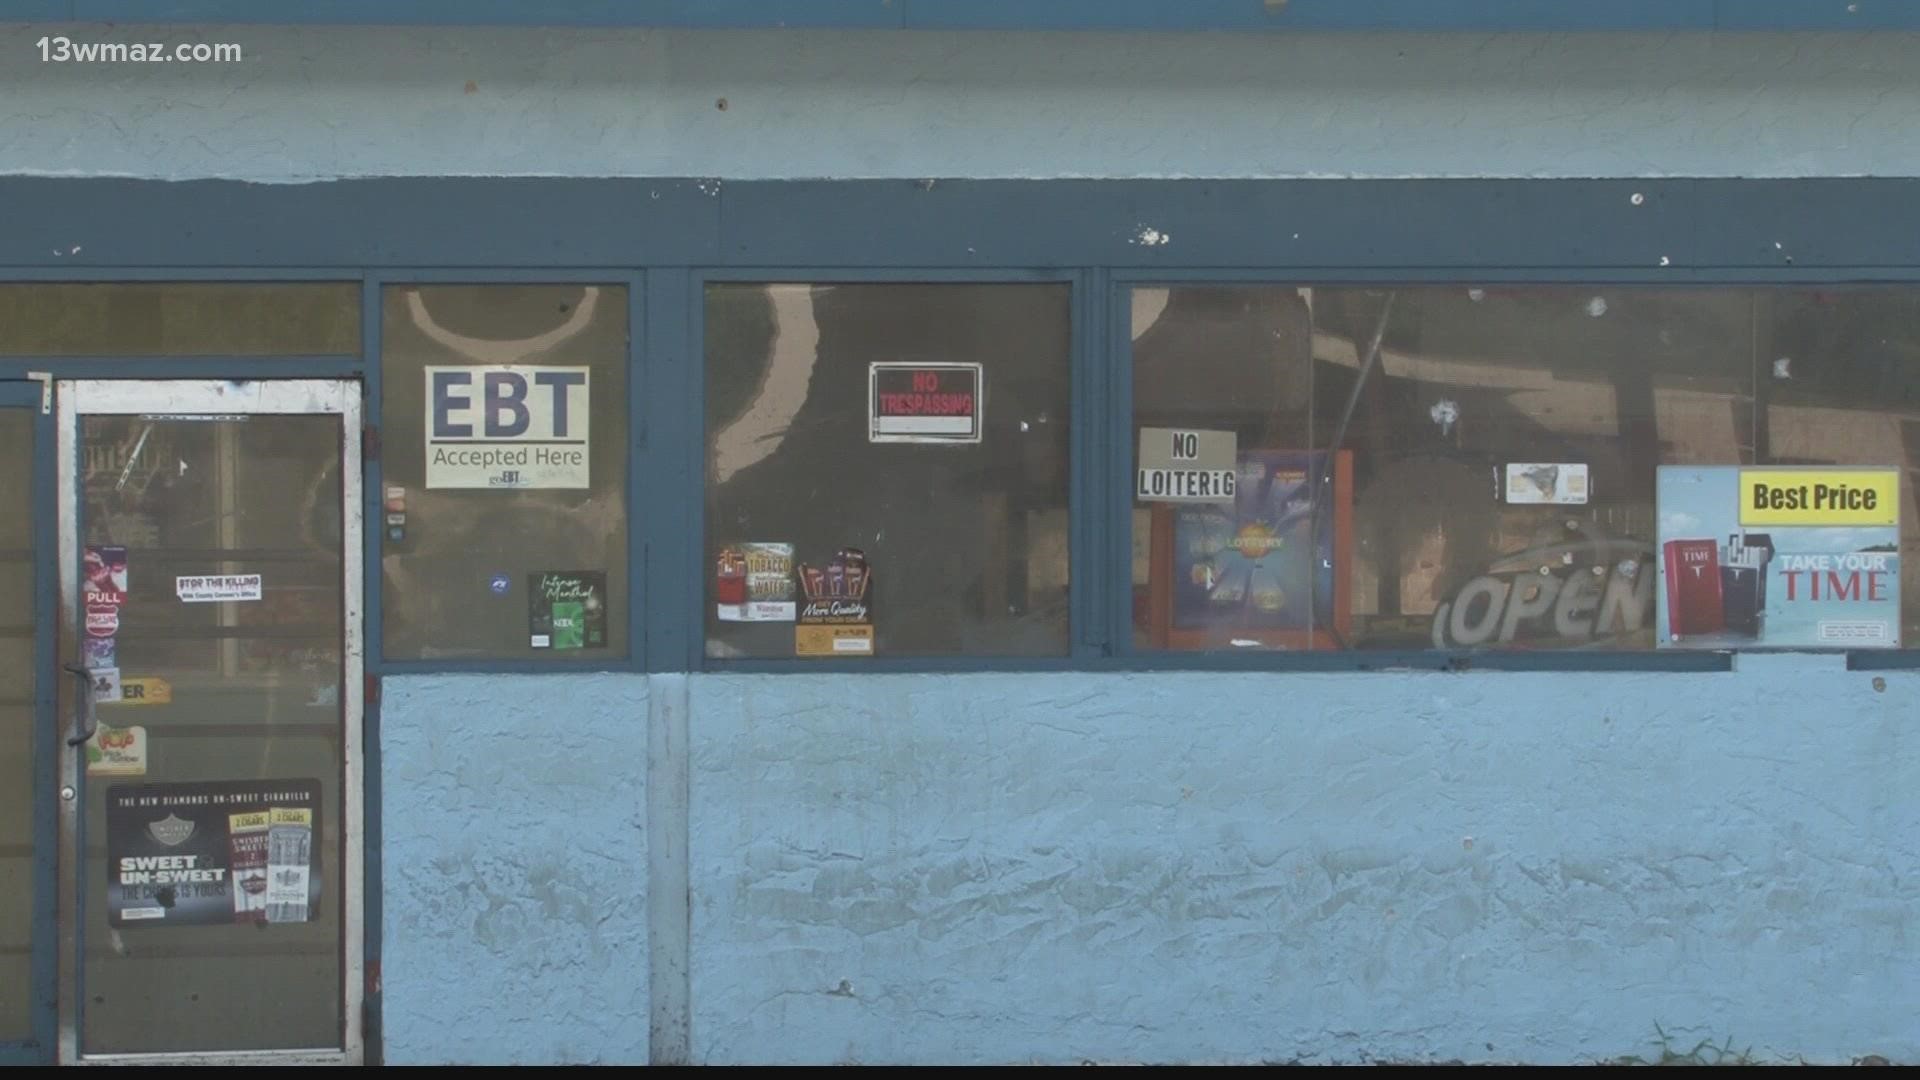 Judge Howard Simms set an Oct. 10 hearing on whether the store should be closed permanently.